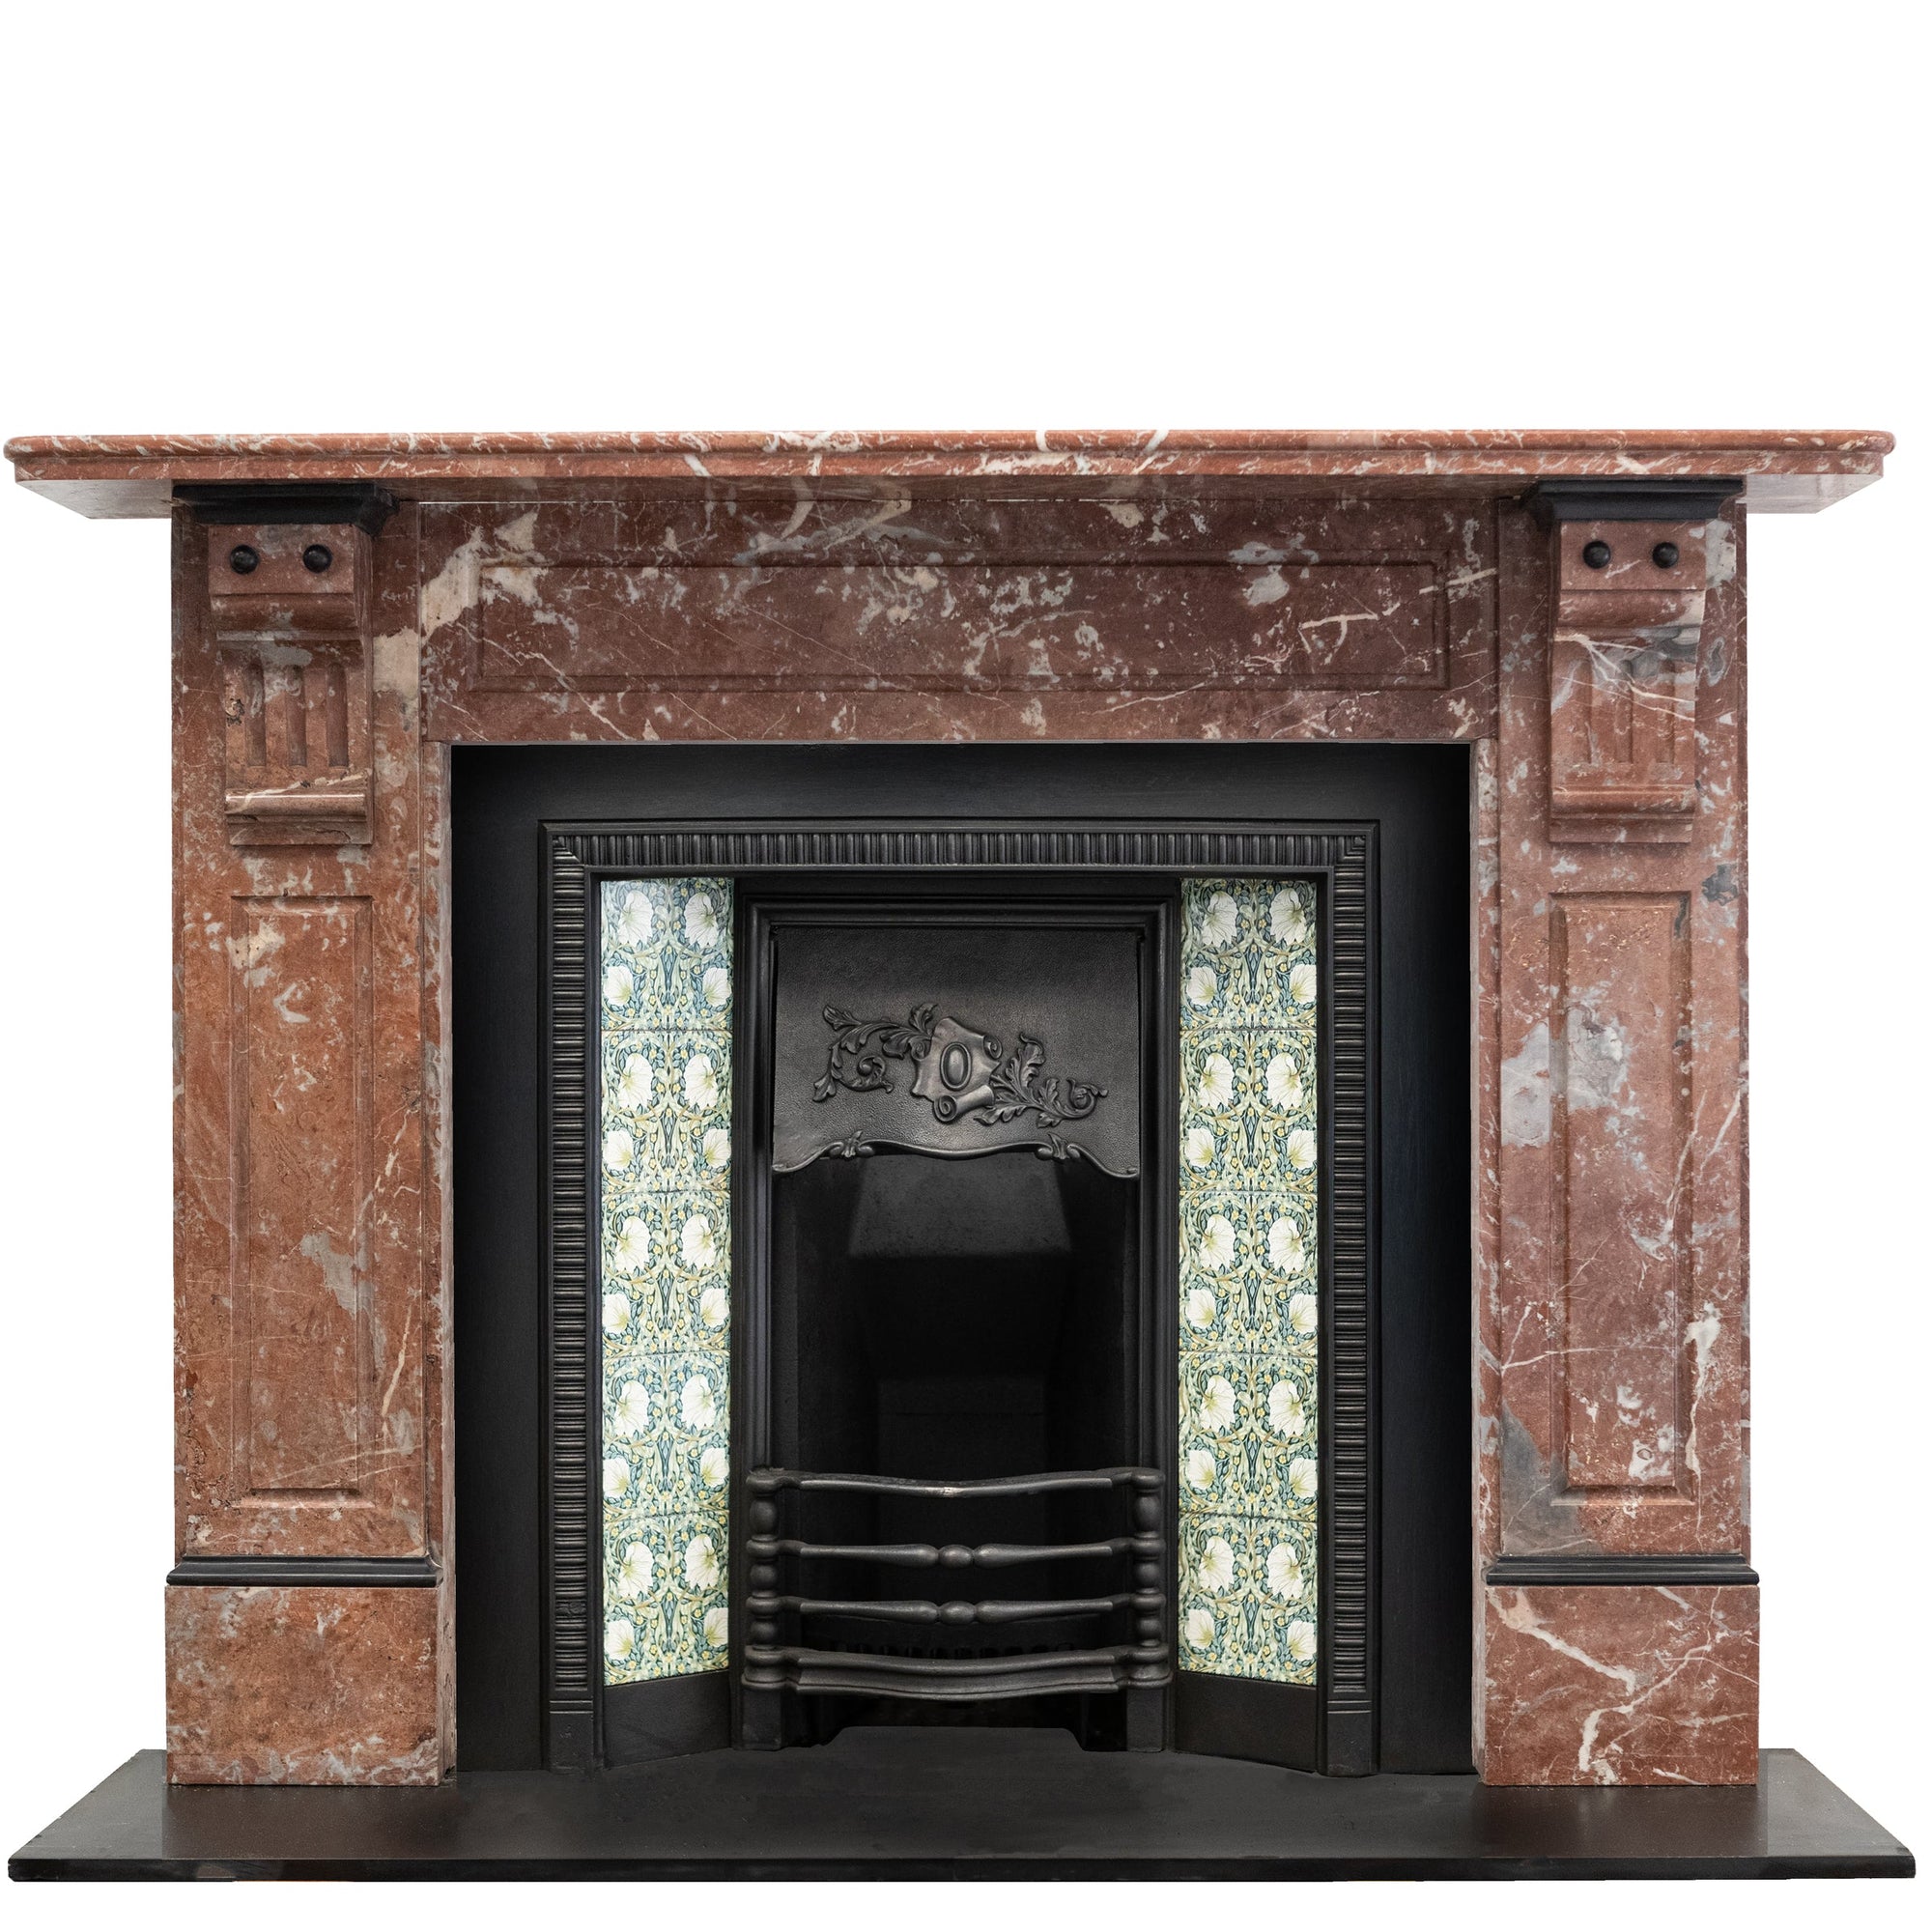 Antique Rouge Royal Red Marble Fireplace Surround | The Architectural Forum